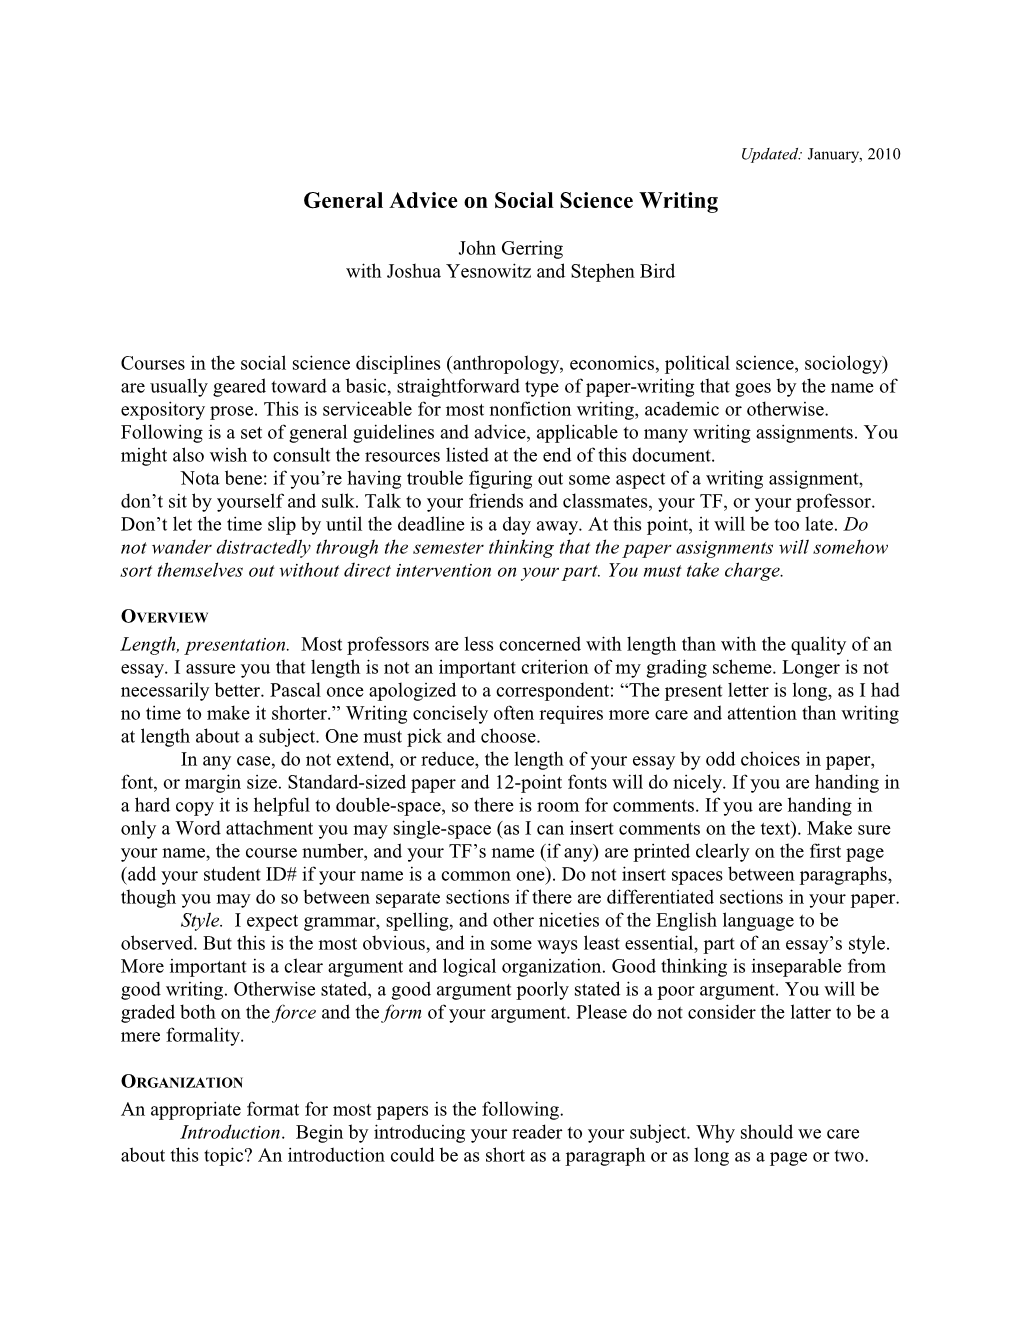 General Advice on Social Science Writing